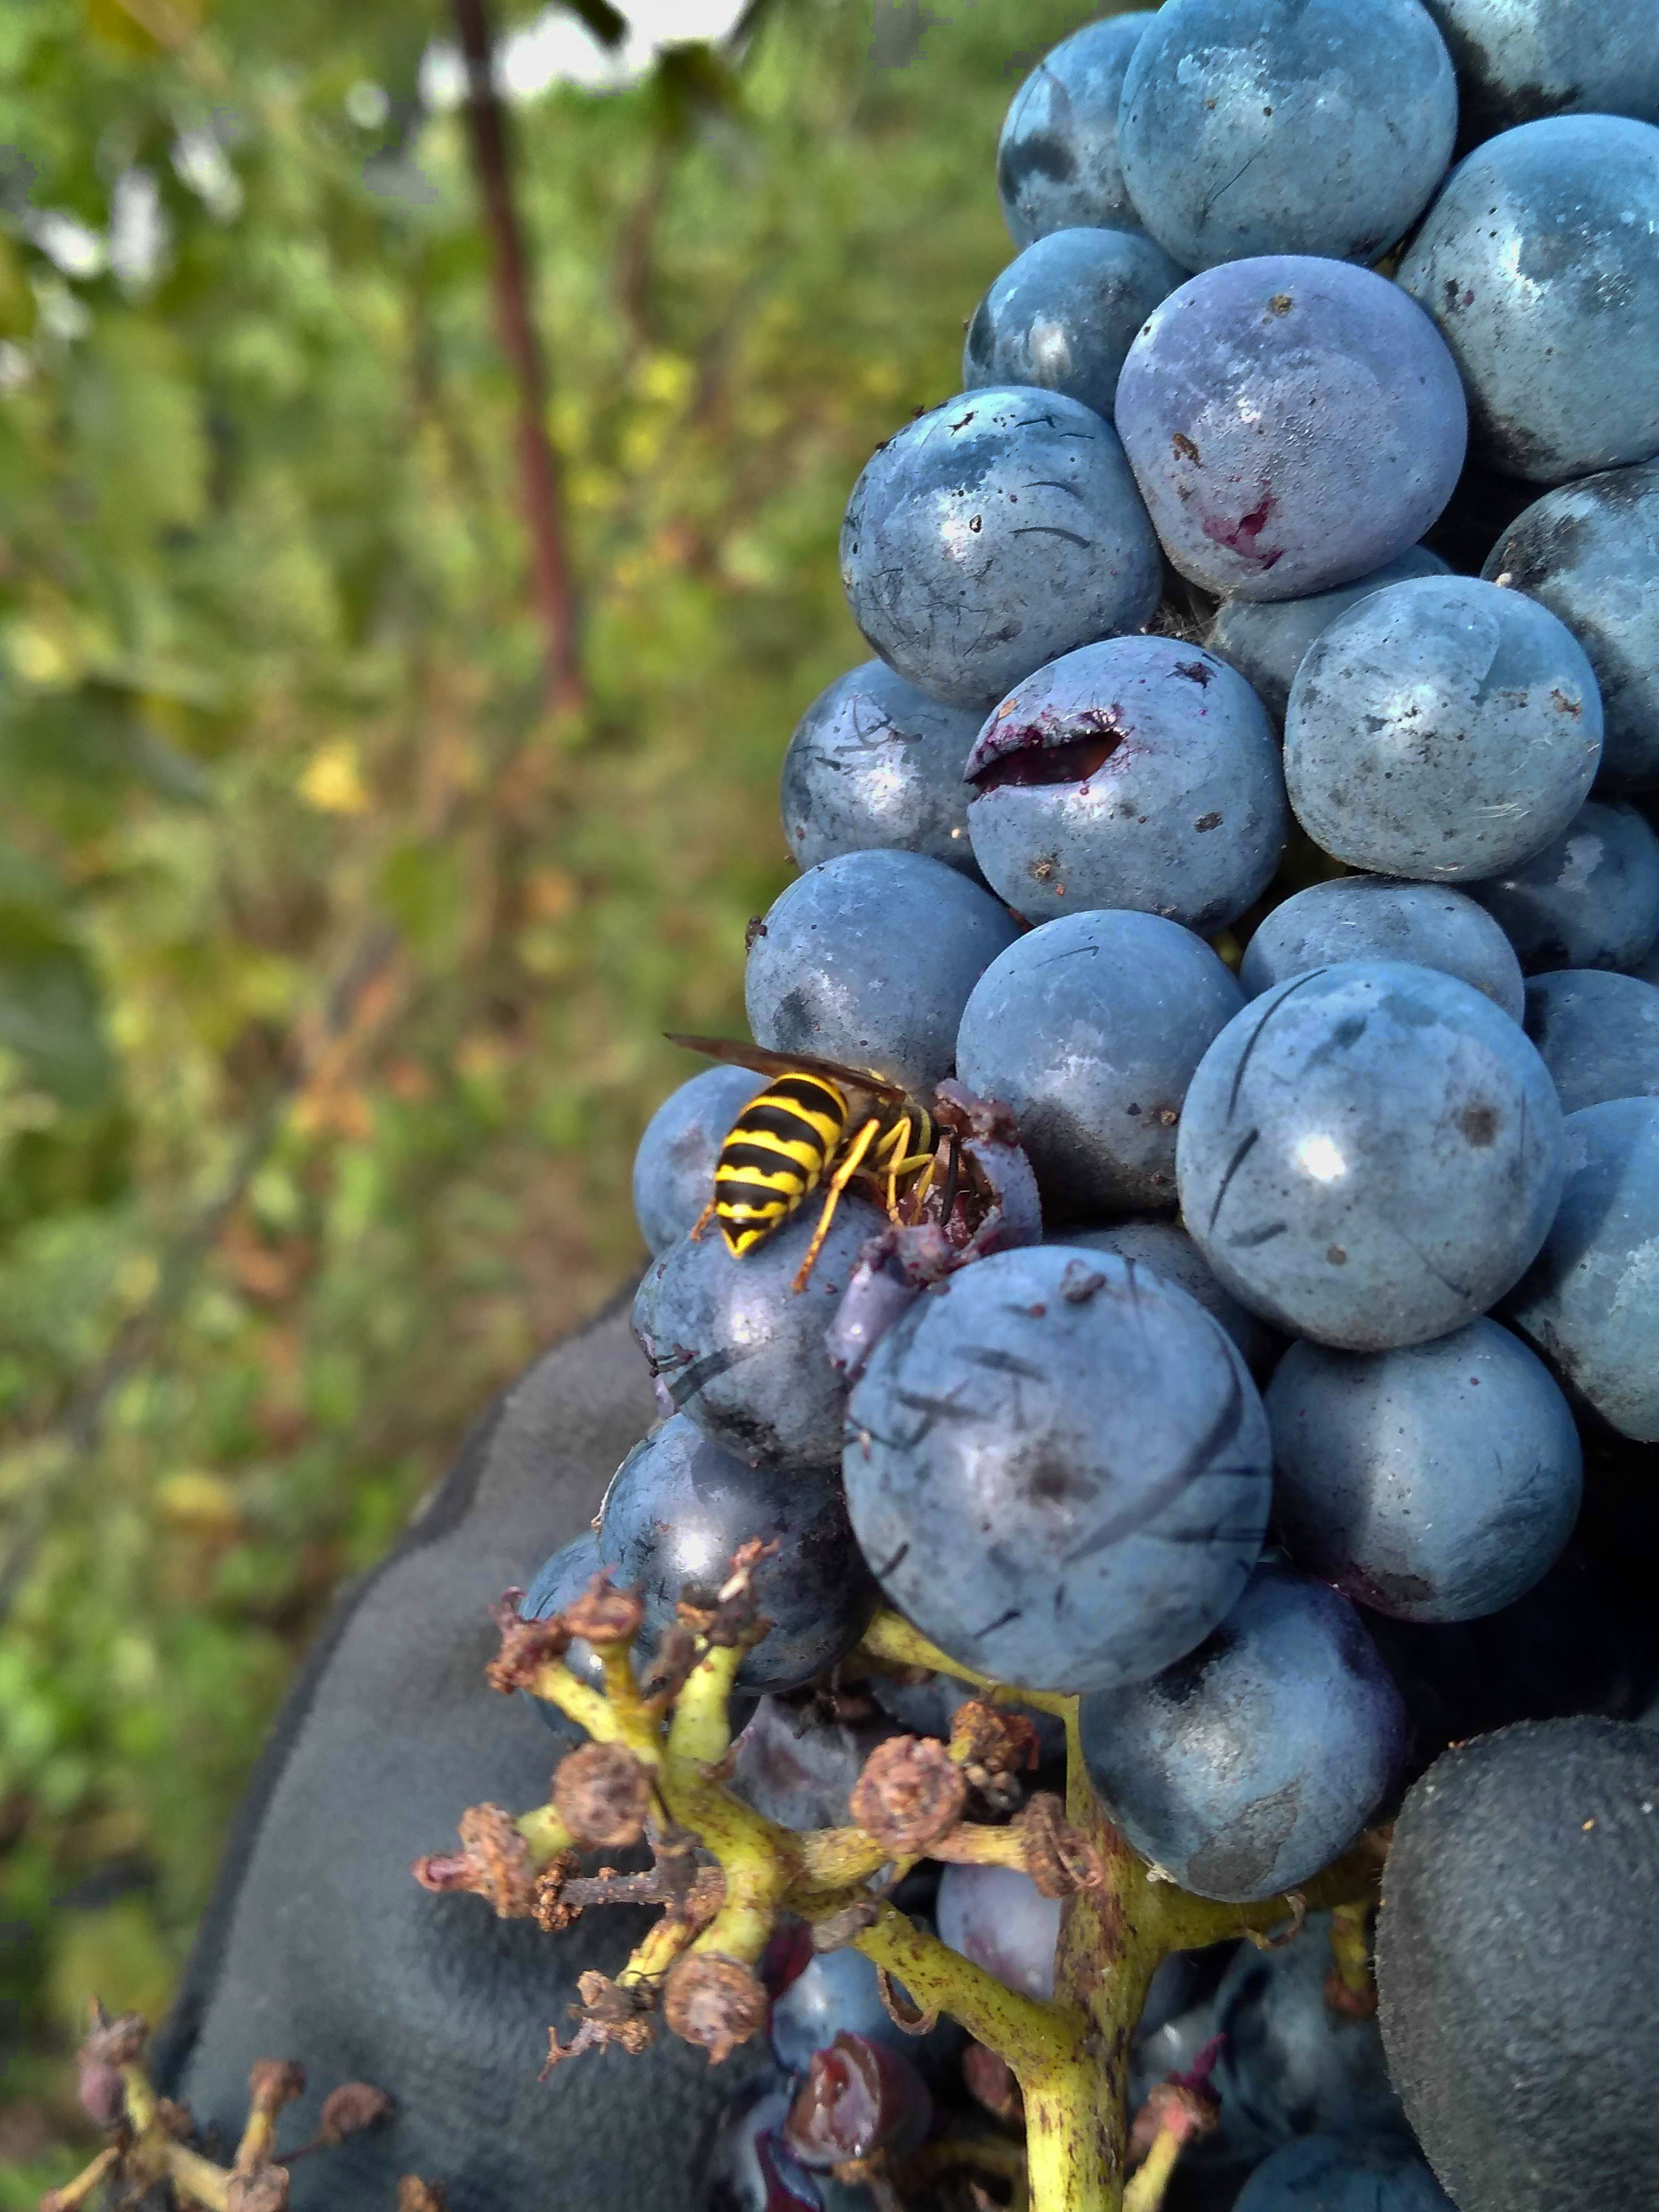 Wasp in grapes